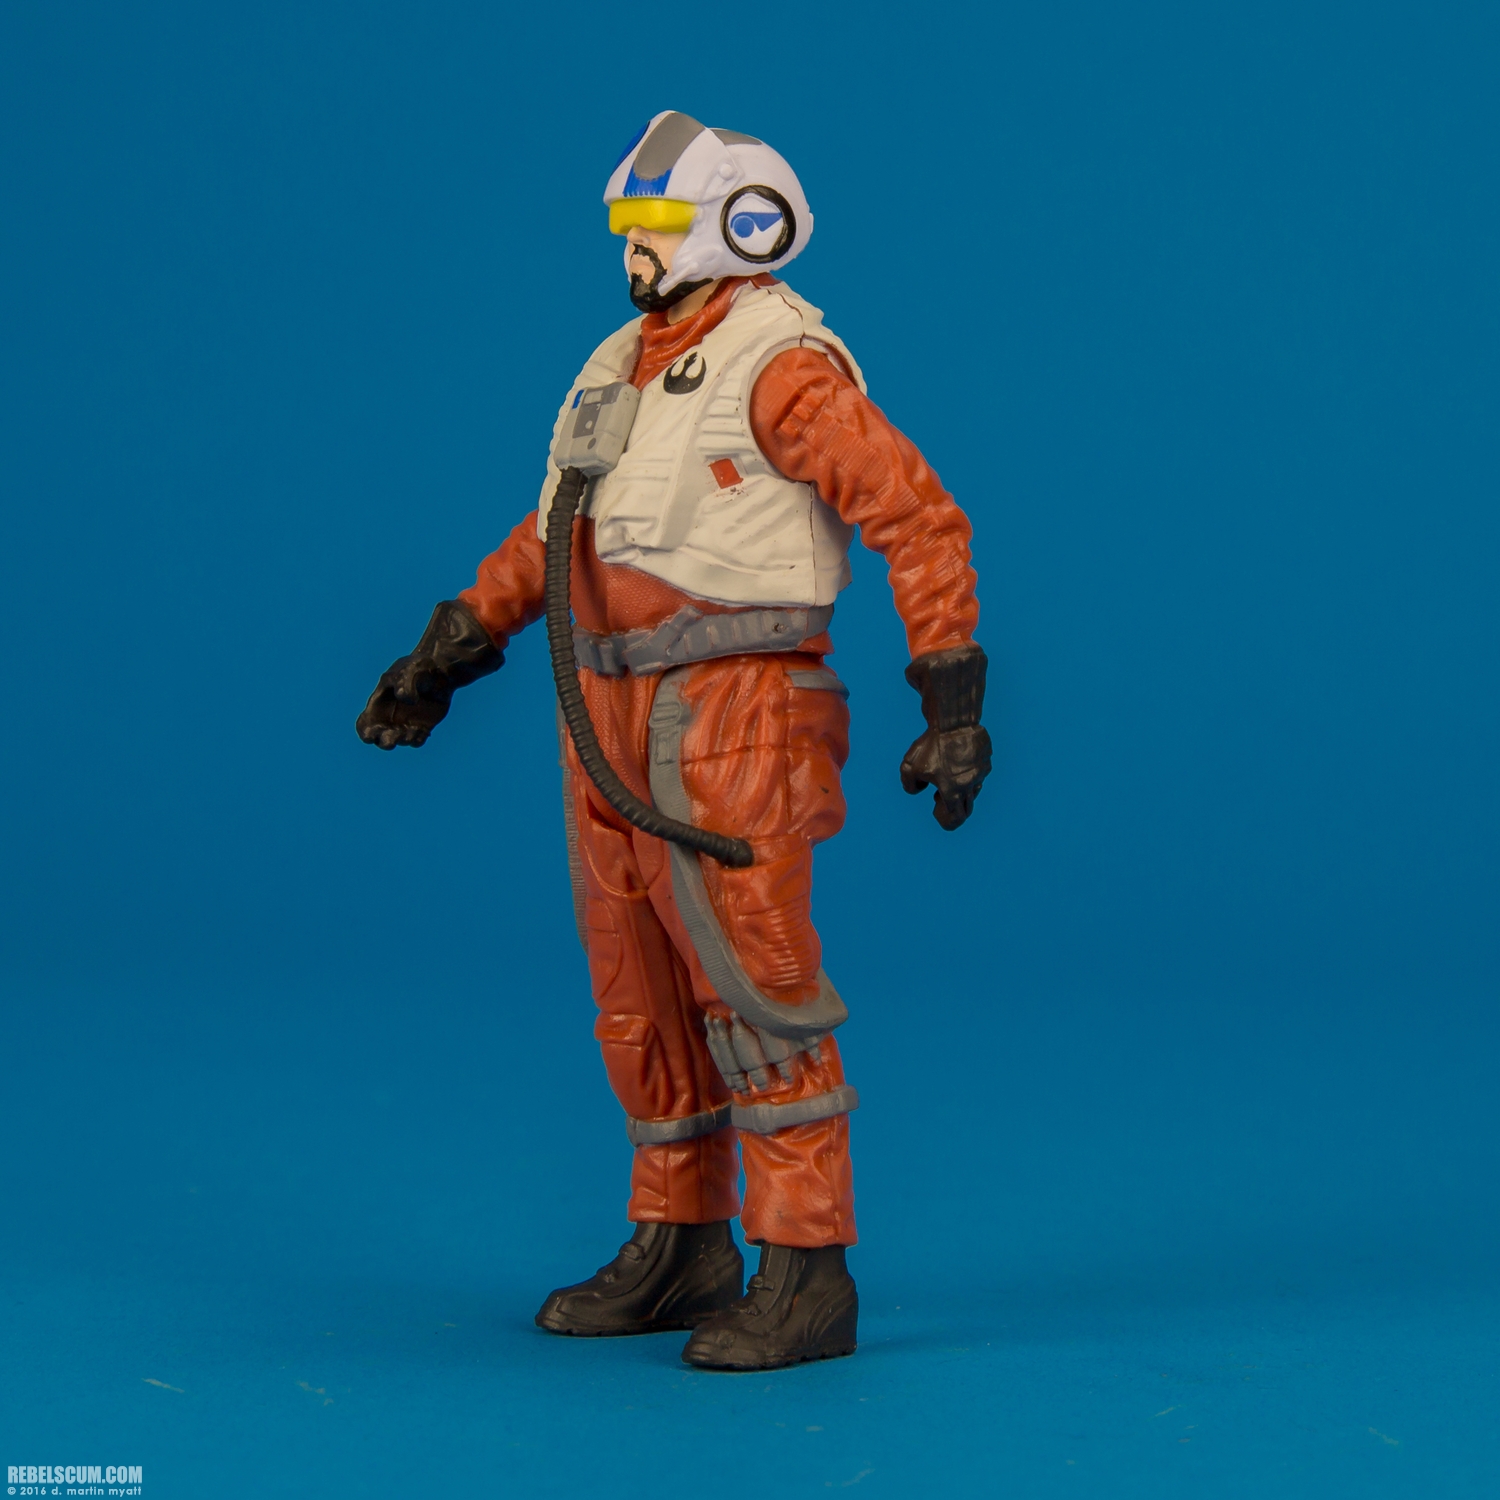 First-Order-Snowtrooper-Officer-Snap-Wexley-The-Force-Awakens-003.jpg